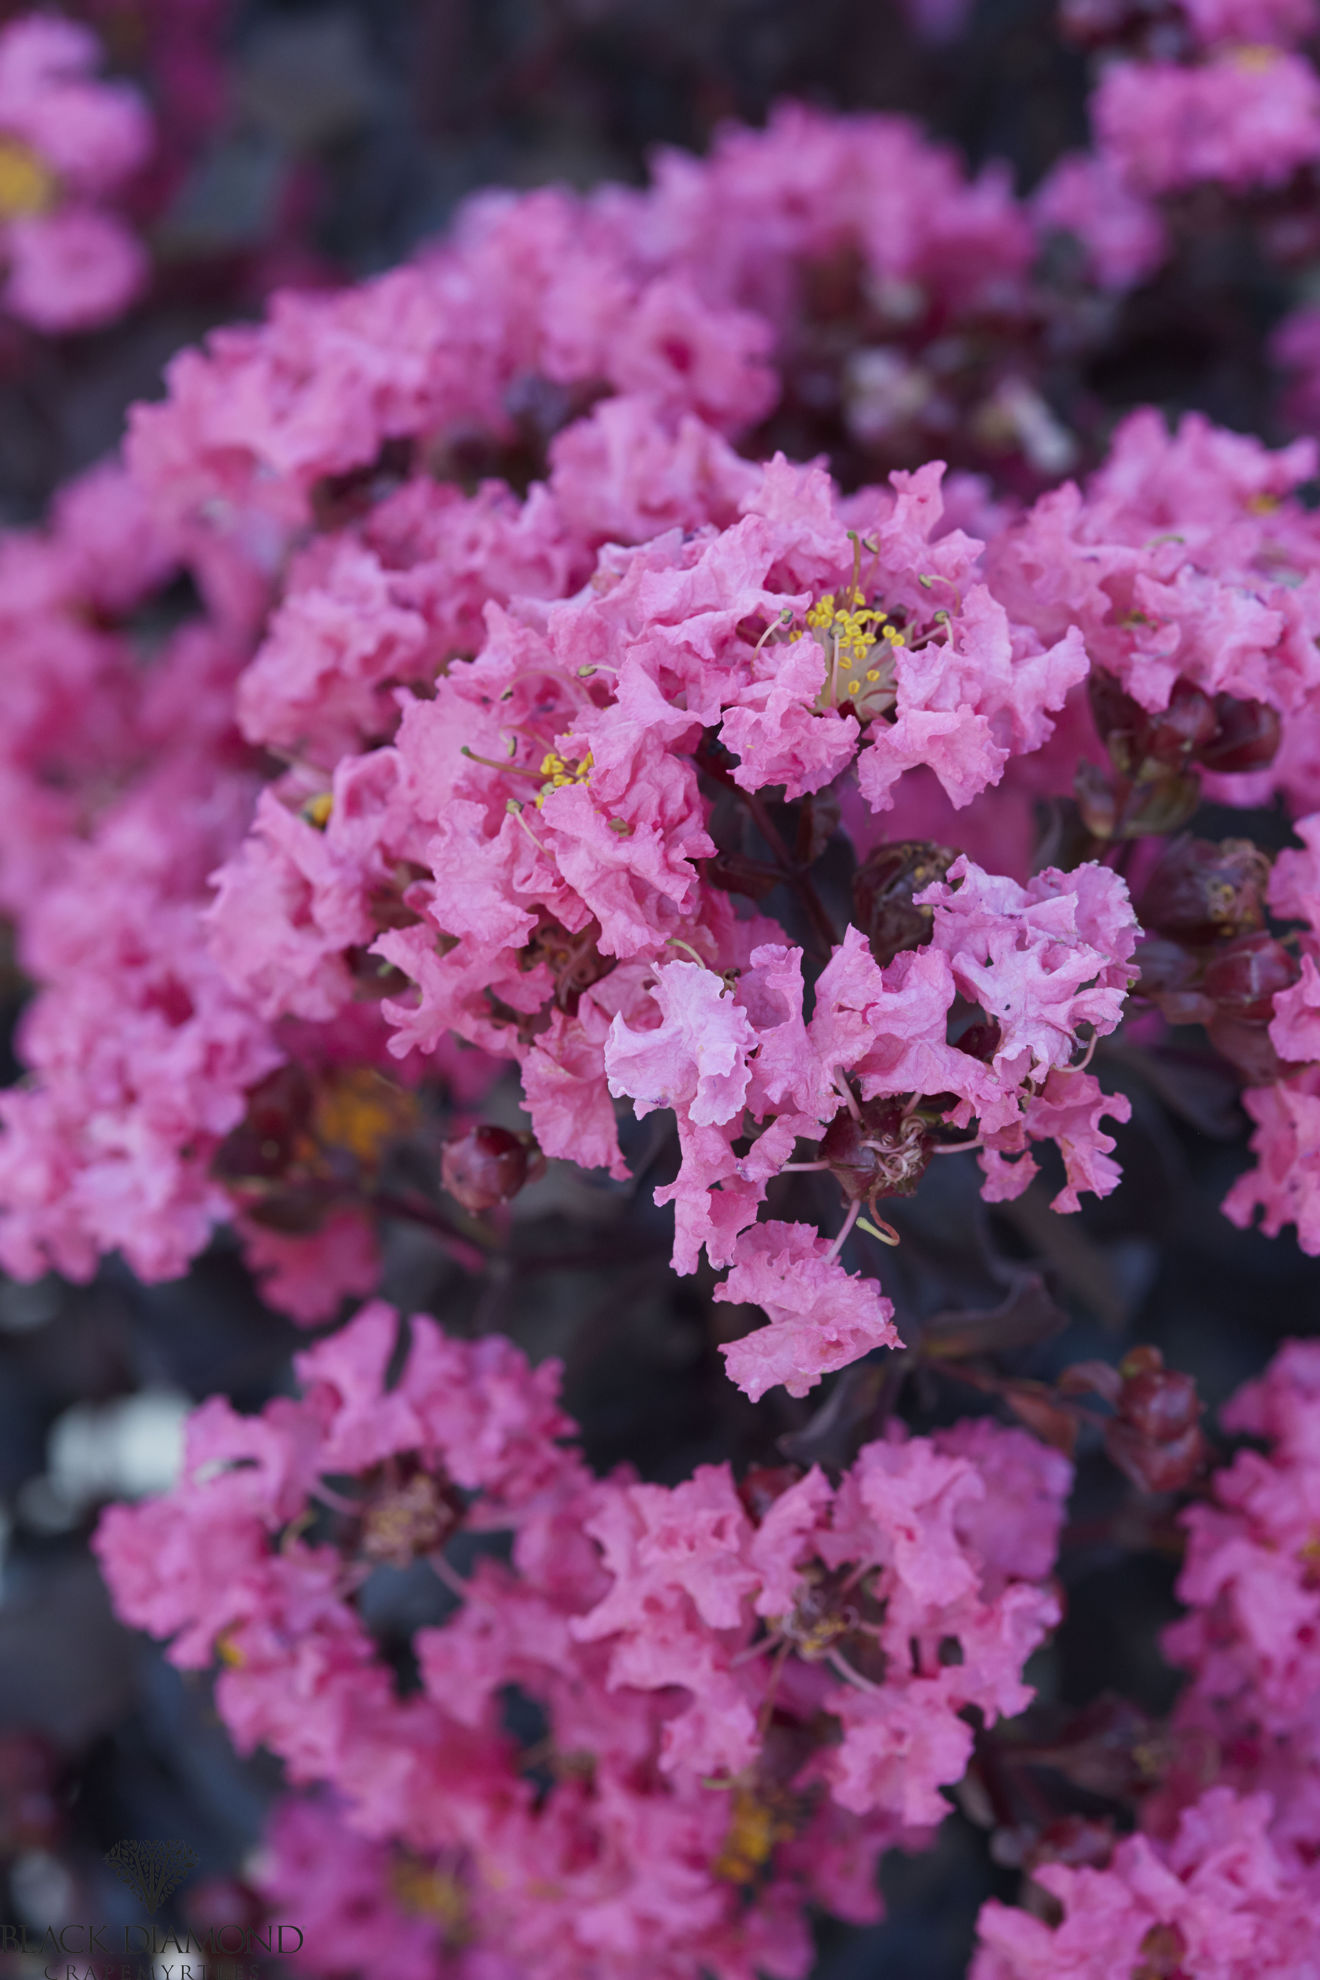 http://www.breederplants.nl/images/thumbs/0002030_Lagerstroemia 'Shell Pink'.jpeg